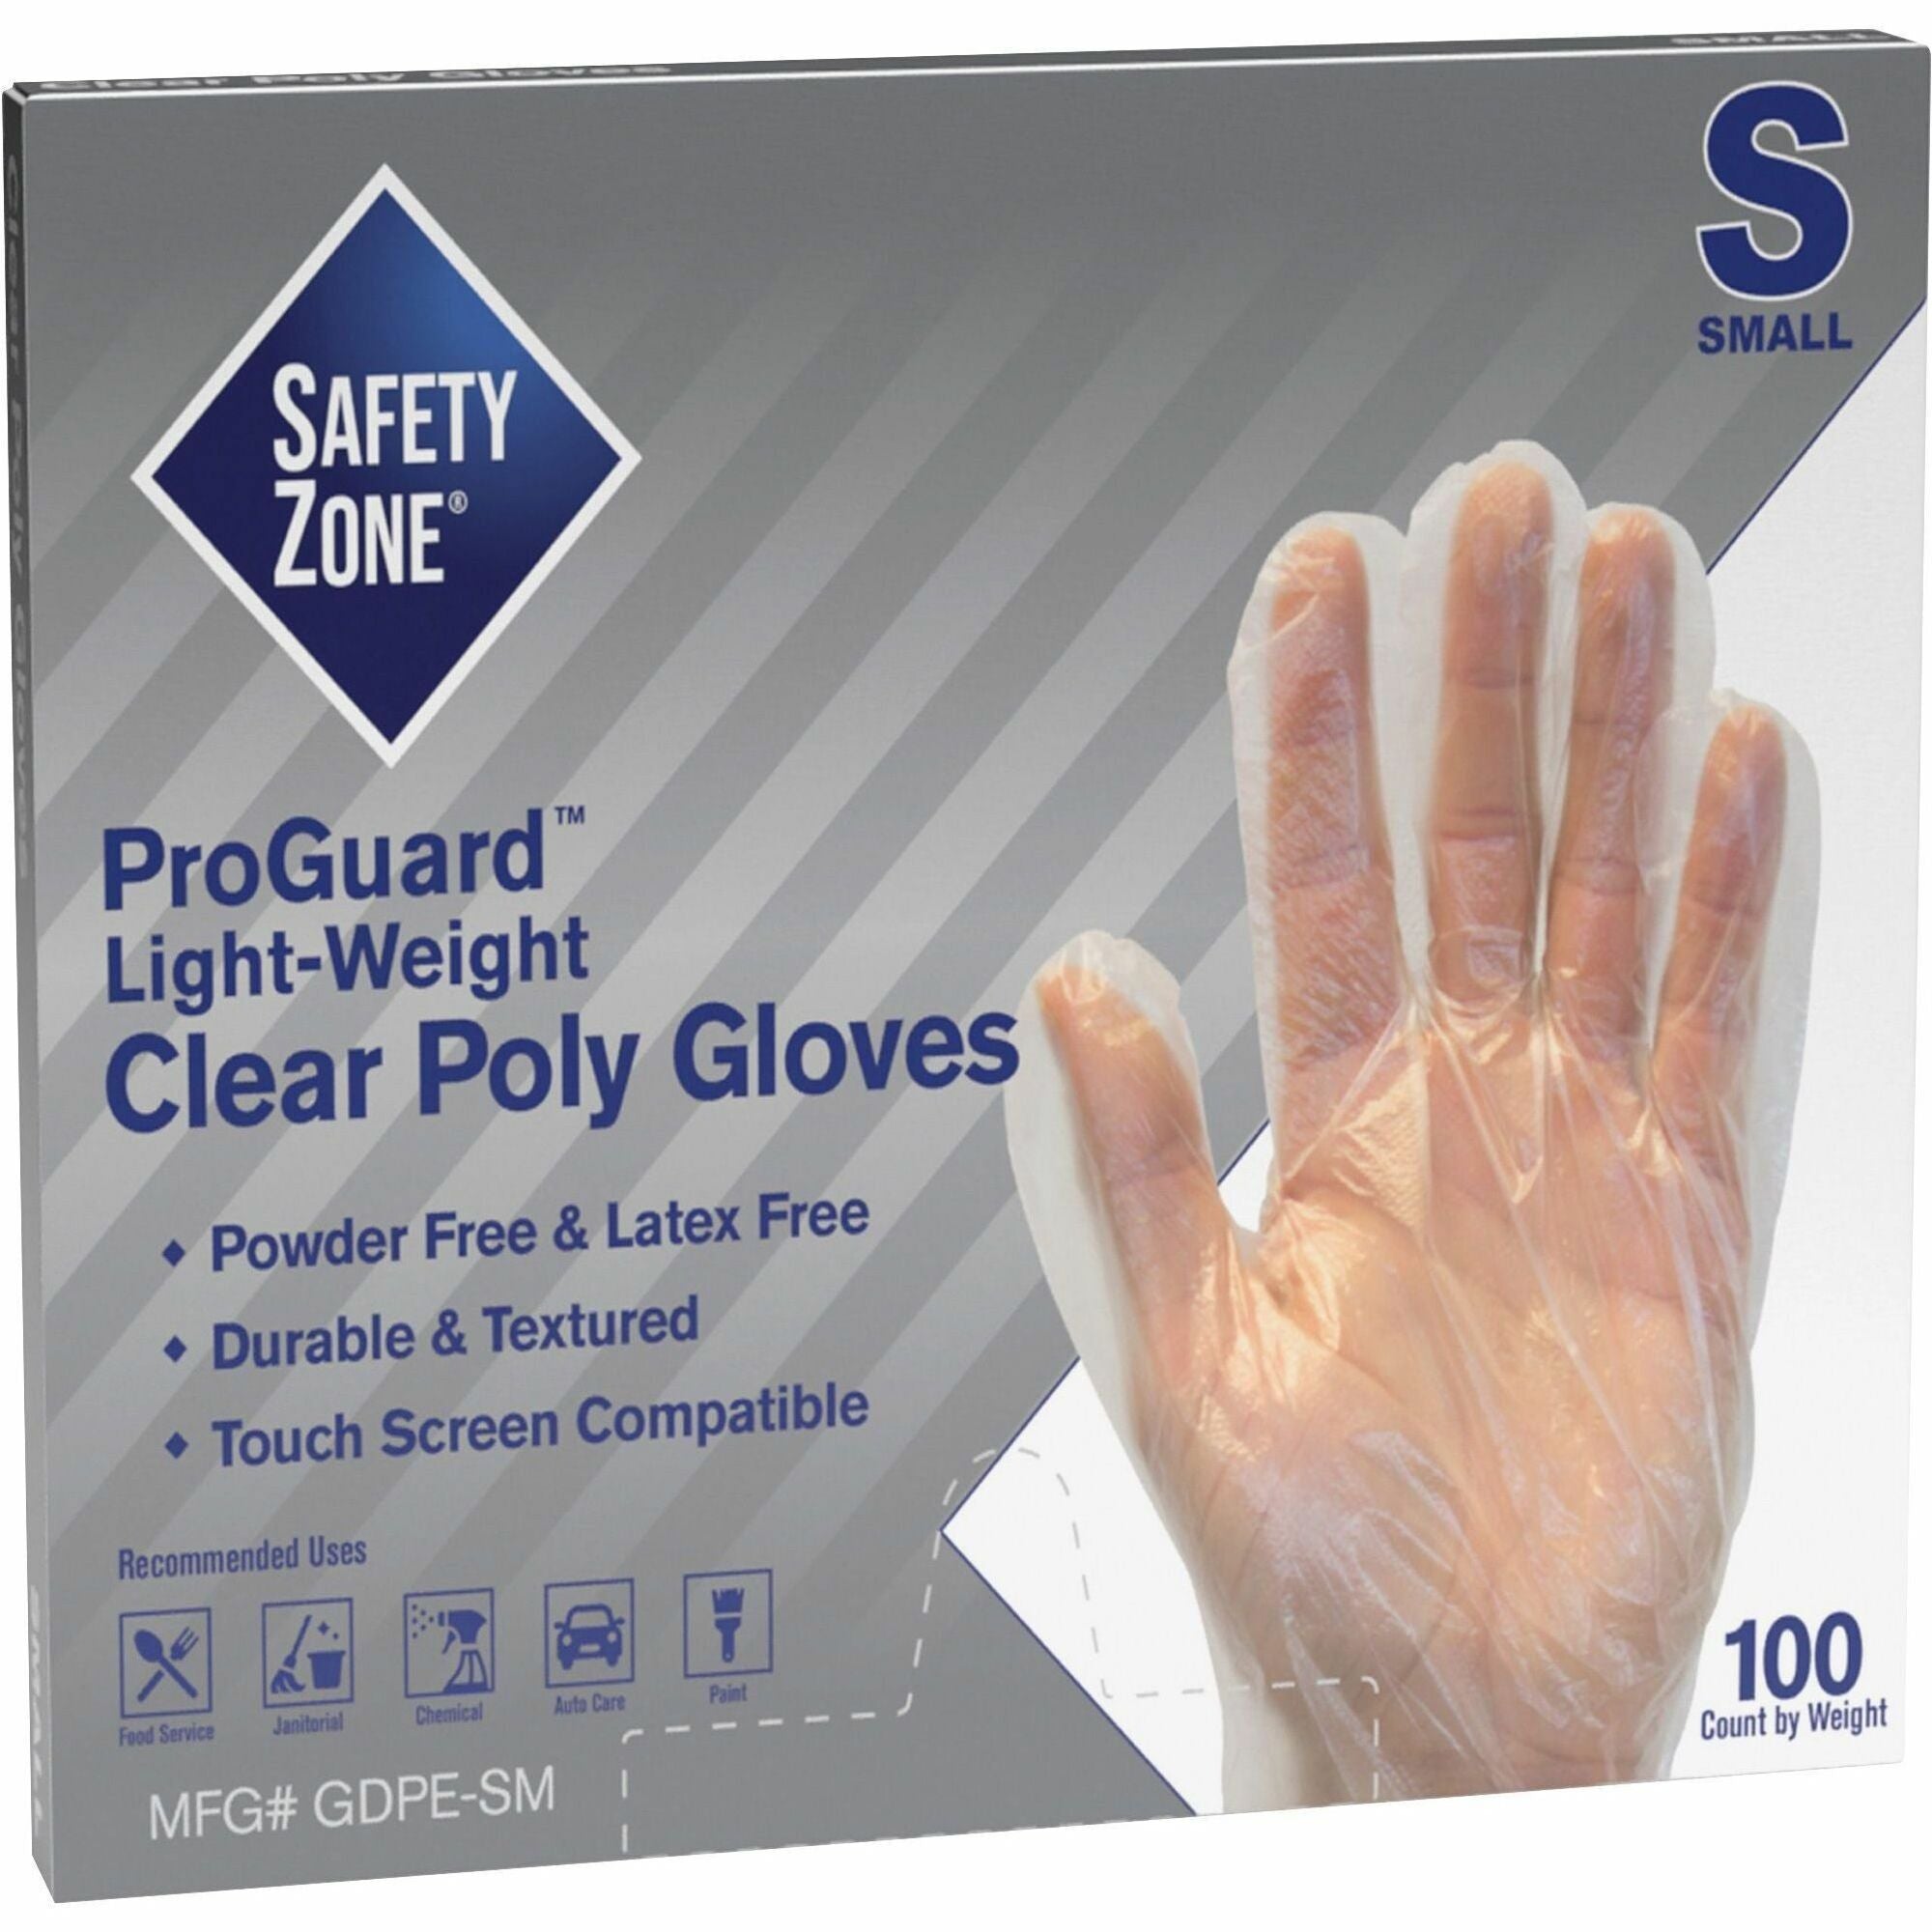 safety-zone-clear-powder-free-polyethylene-gloves-small-size-clear-die-cut-heat-sealed-edge-embossed-grip-latex-free-silicone-free-recyclable-for-food-100-pack-1175-glove-length_szngdpesm - 1